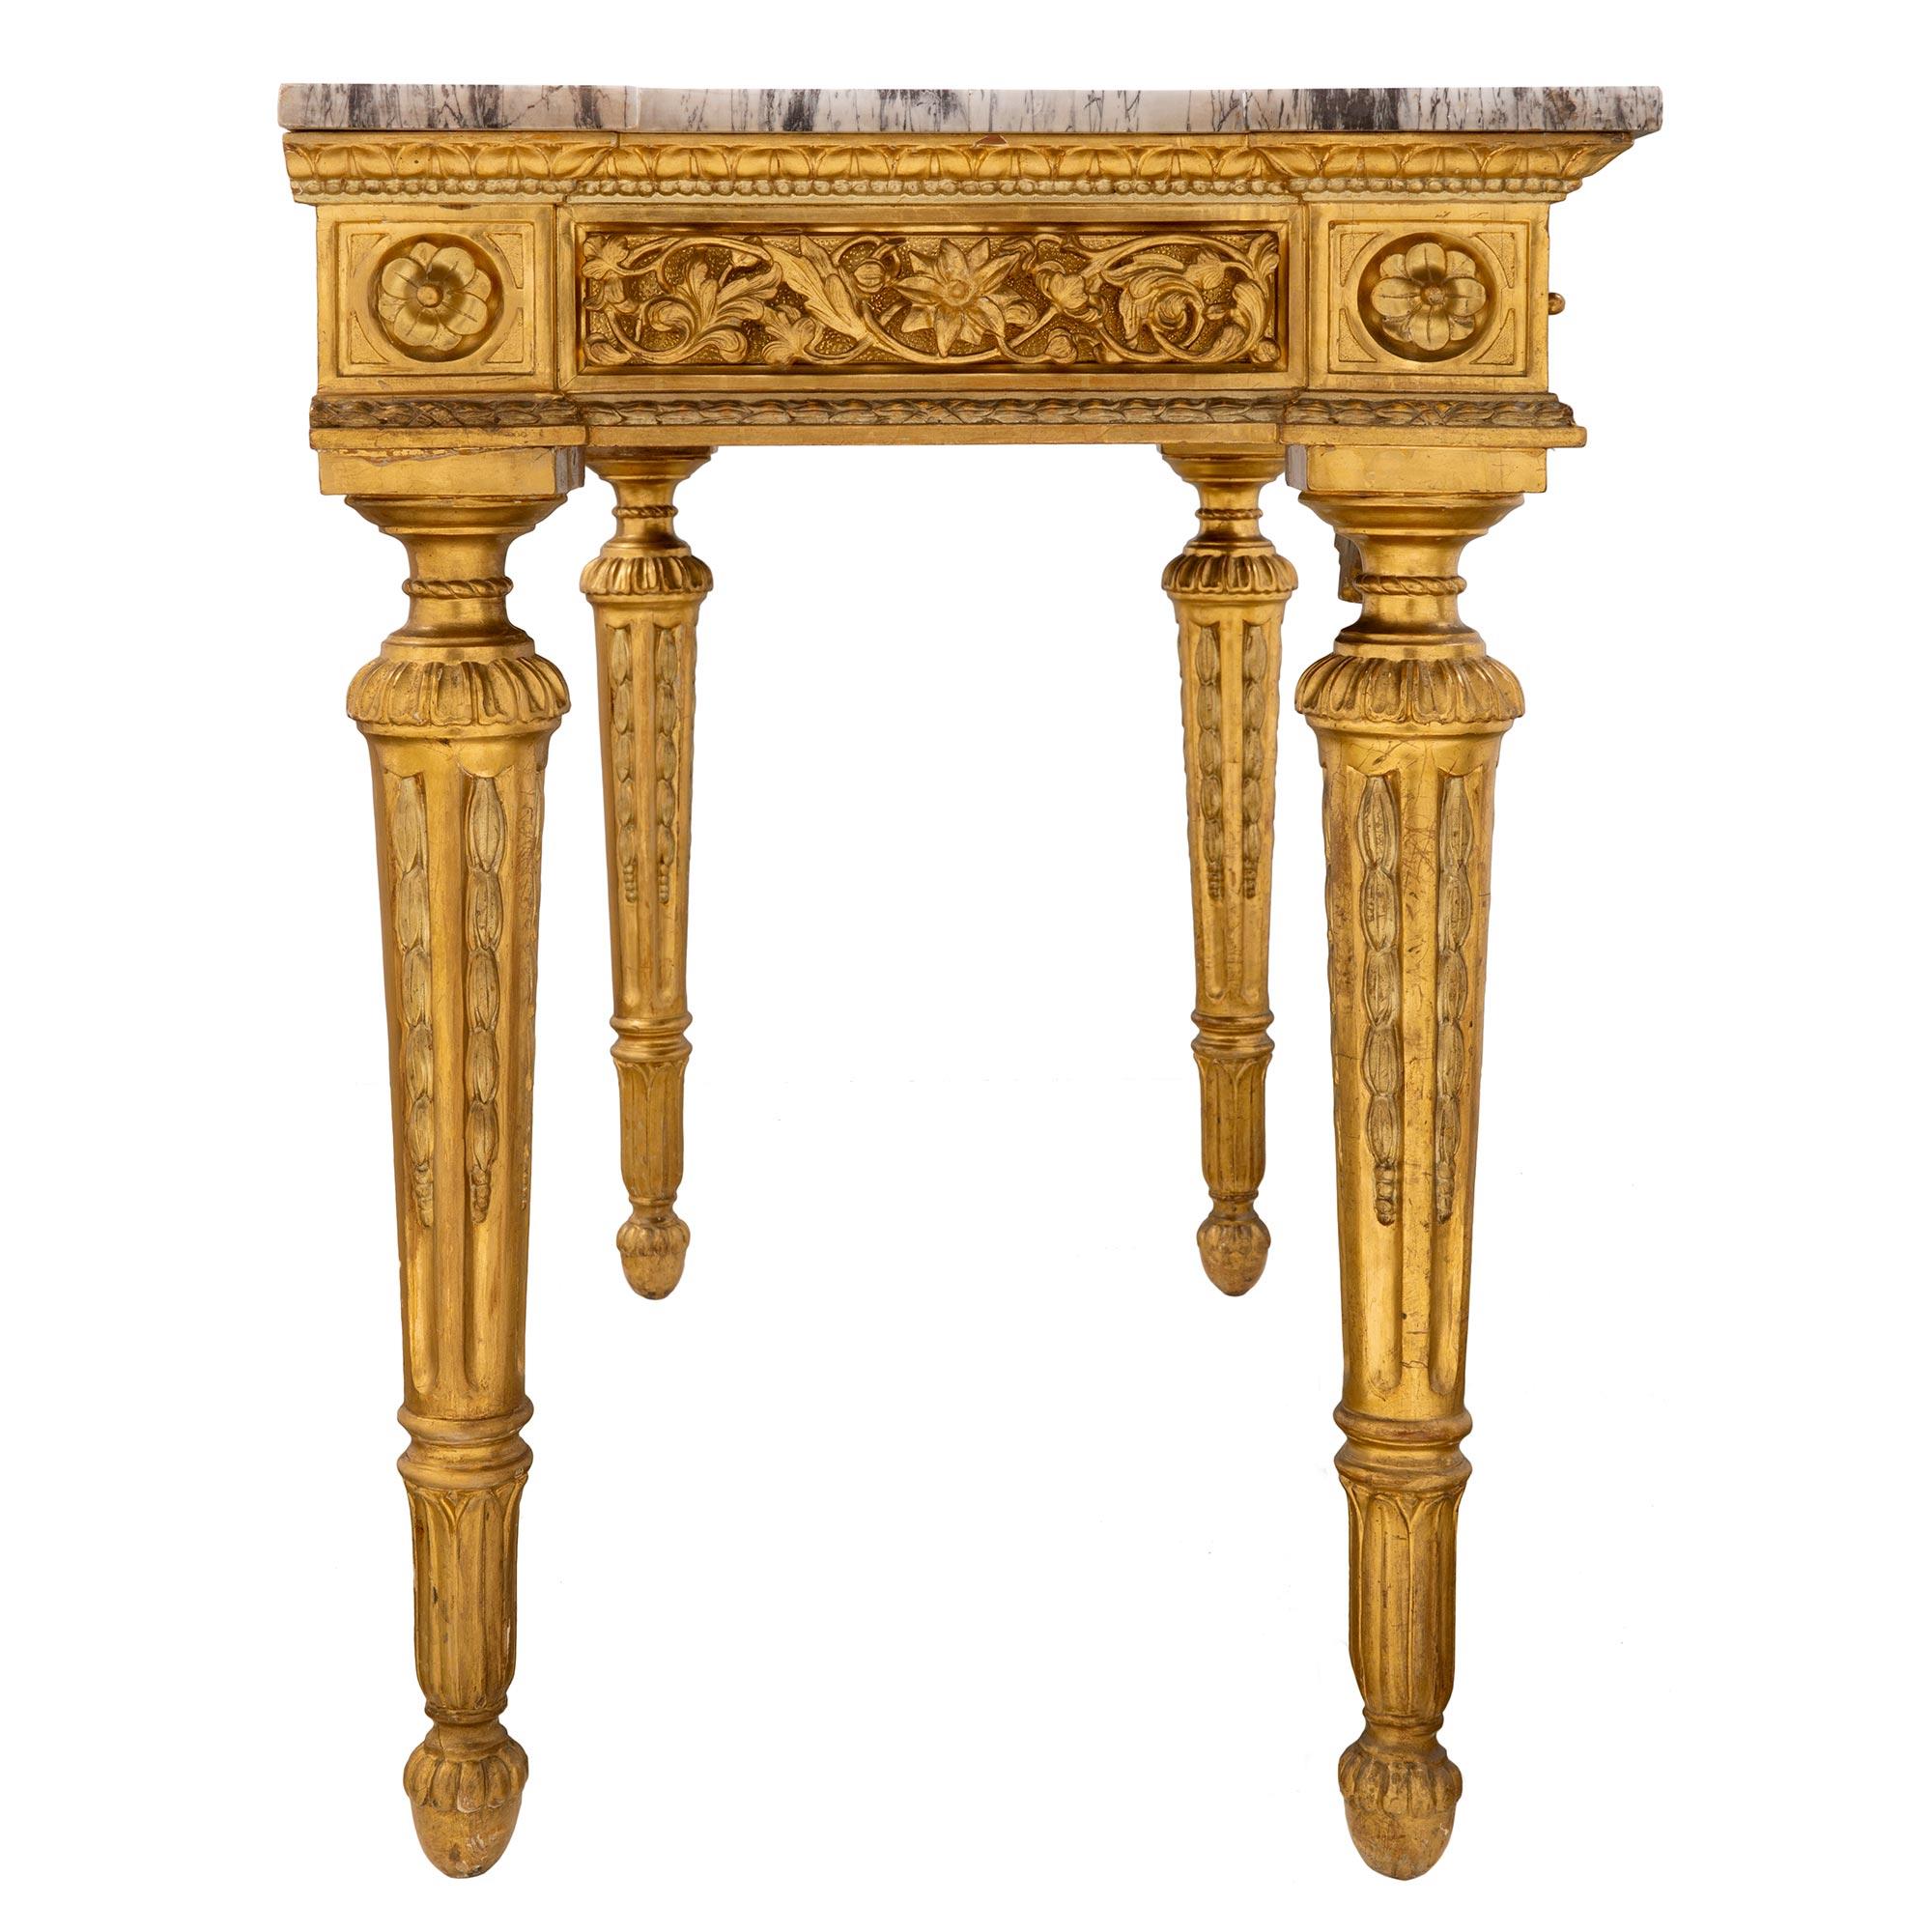 French 19th Century Louis XVI Style Giltwood and Marble Freestanding Console For Sale 1